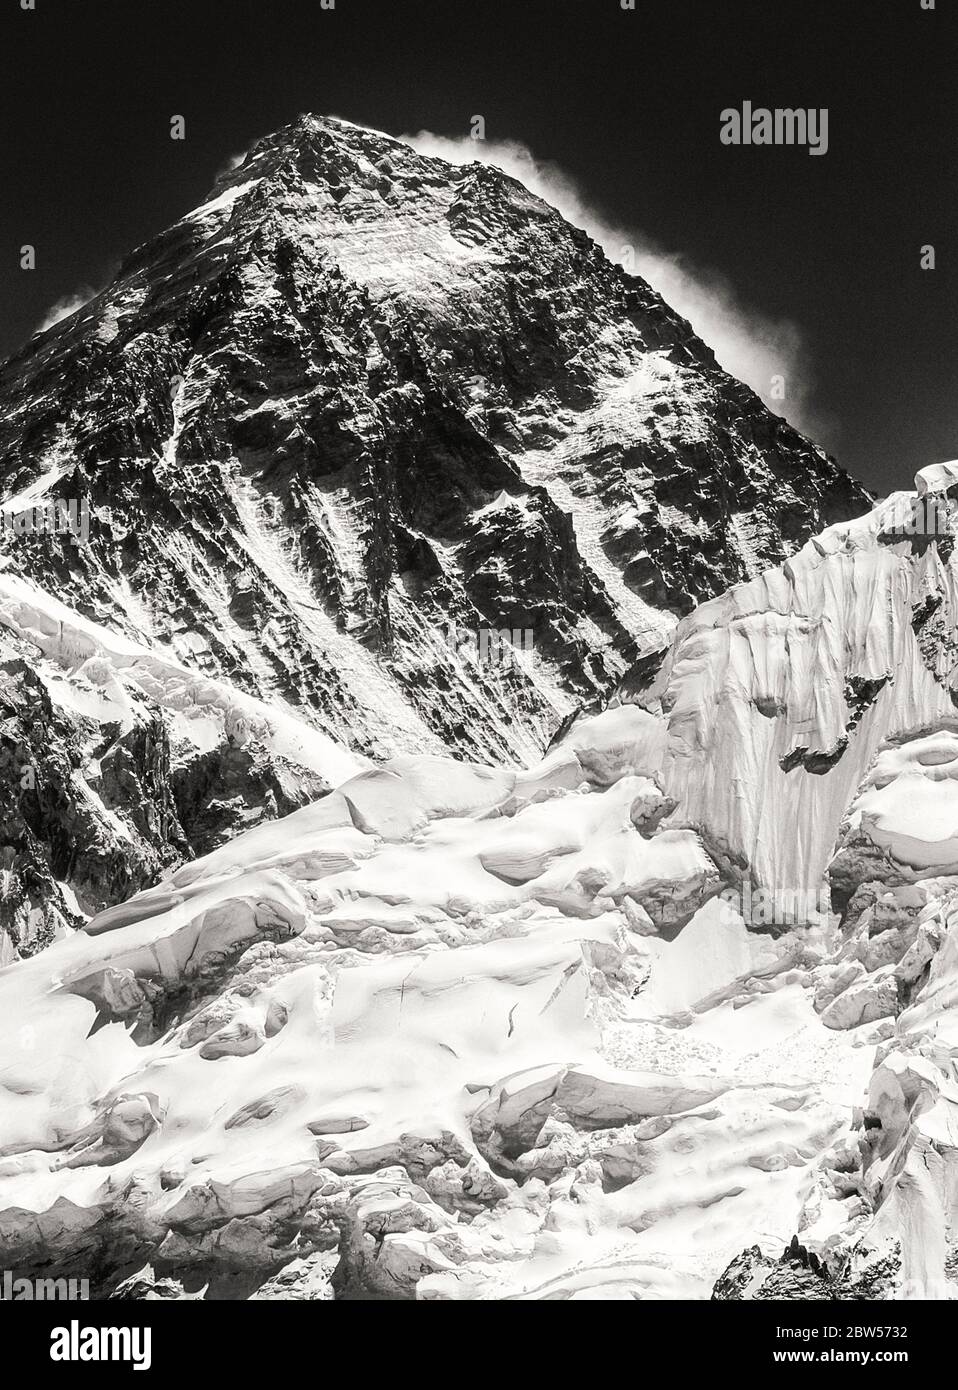 Nepal. Mount Everest [Chomolongma] 8848m the highest mountain in the world, in monochrome, as seen from Kalar Patar above Gorak Shep pasture Stock Photo